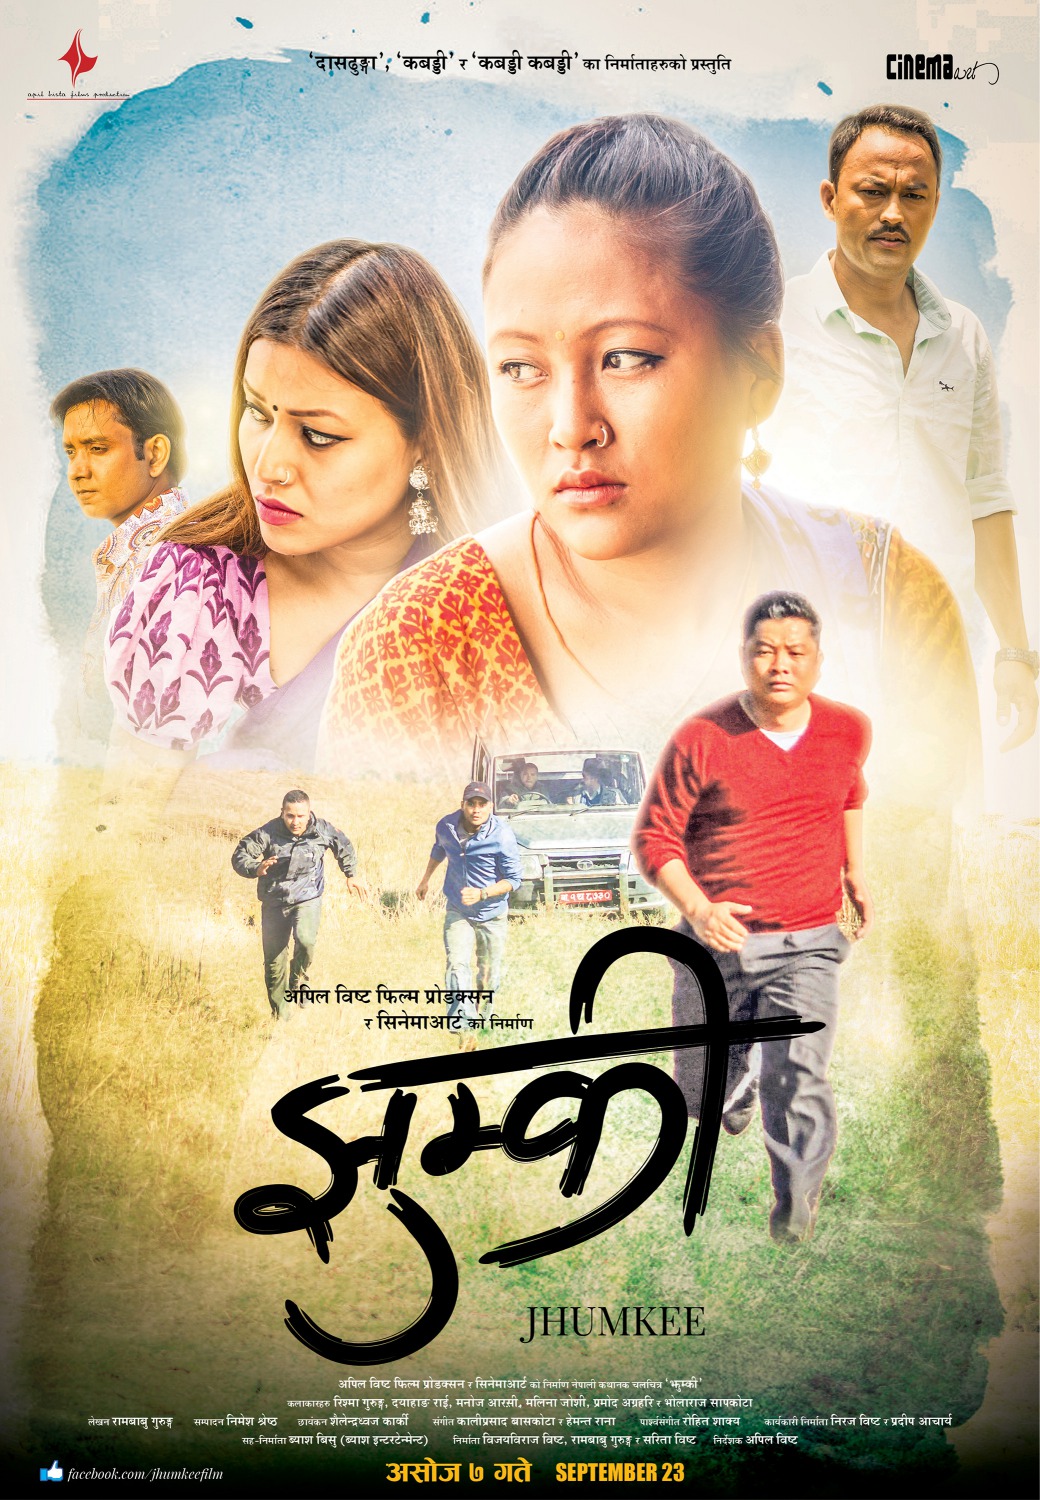 Extra Large Movie Poster Image for Jhumkee (#2 of 5)